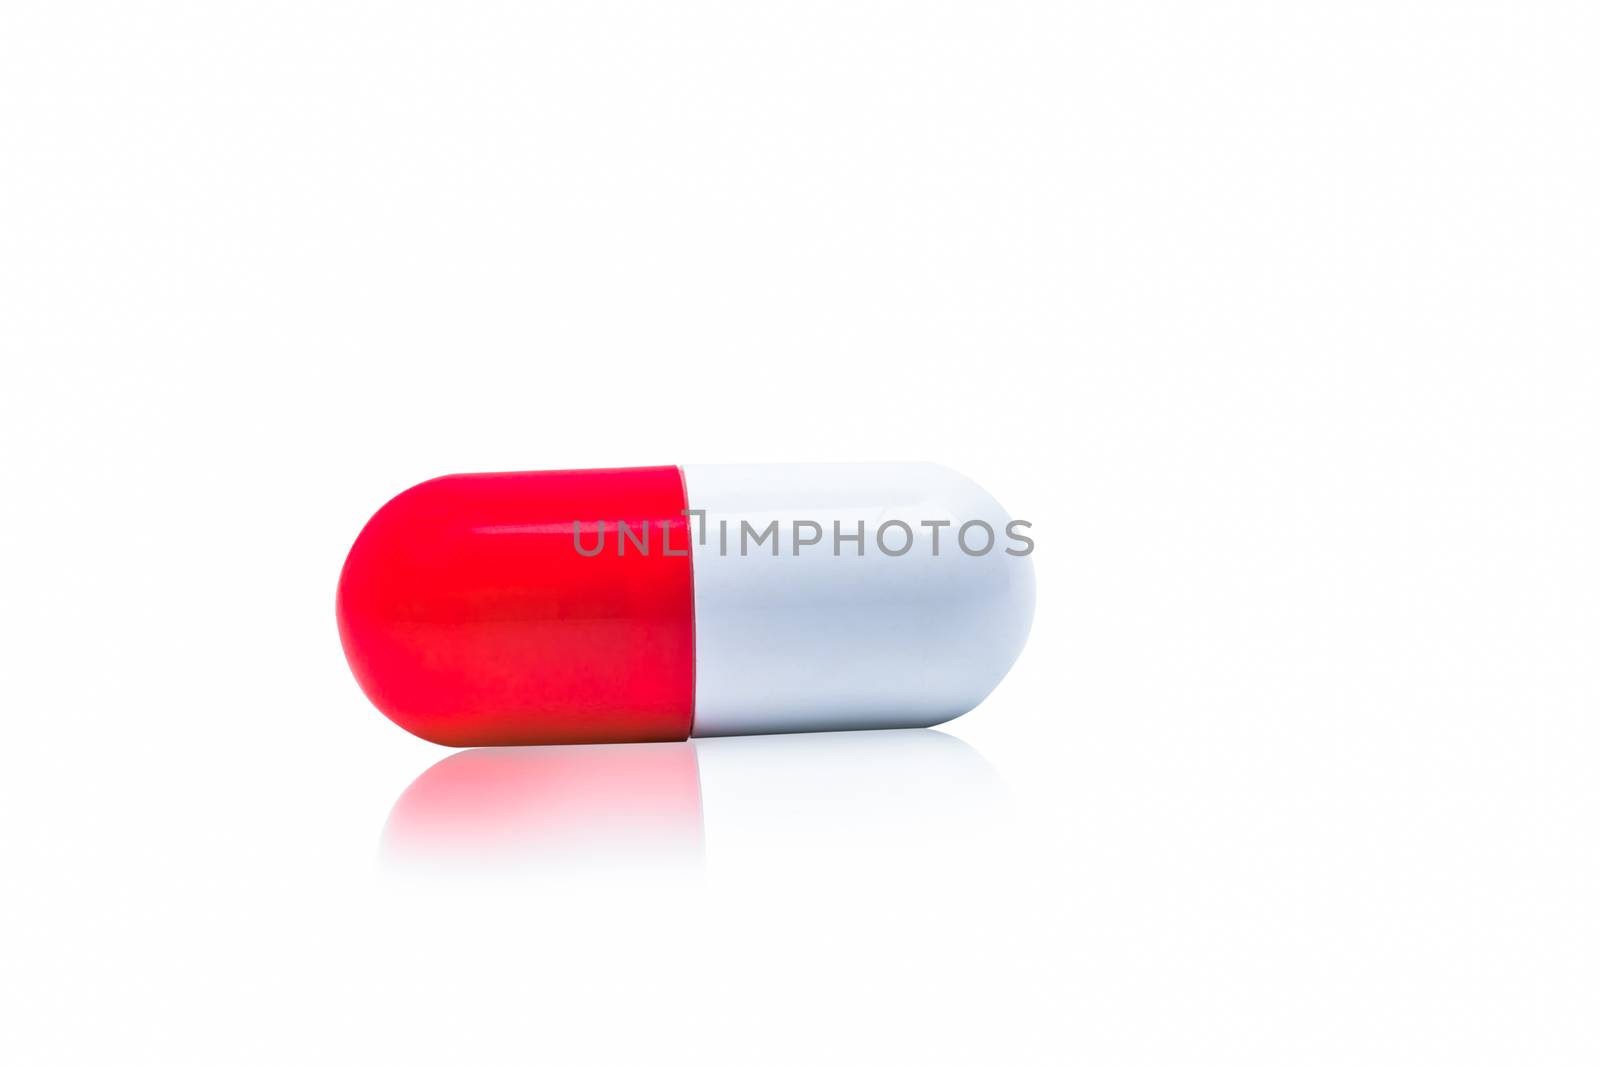 Red, white capsule pills isolated on white background with shadow and copy space for text. Drug resistance concept. Antibiotics drug use with reasonable and global healthcare concept. Pharmacy sign and symbol. Pharmaceutical industry. Pharmacy background. Antibiotic or antimicrobial drug resistance. Health budgets and policy. by Fahroni